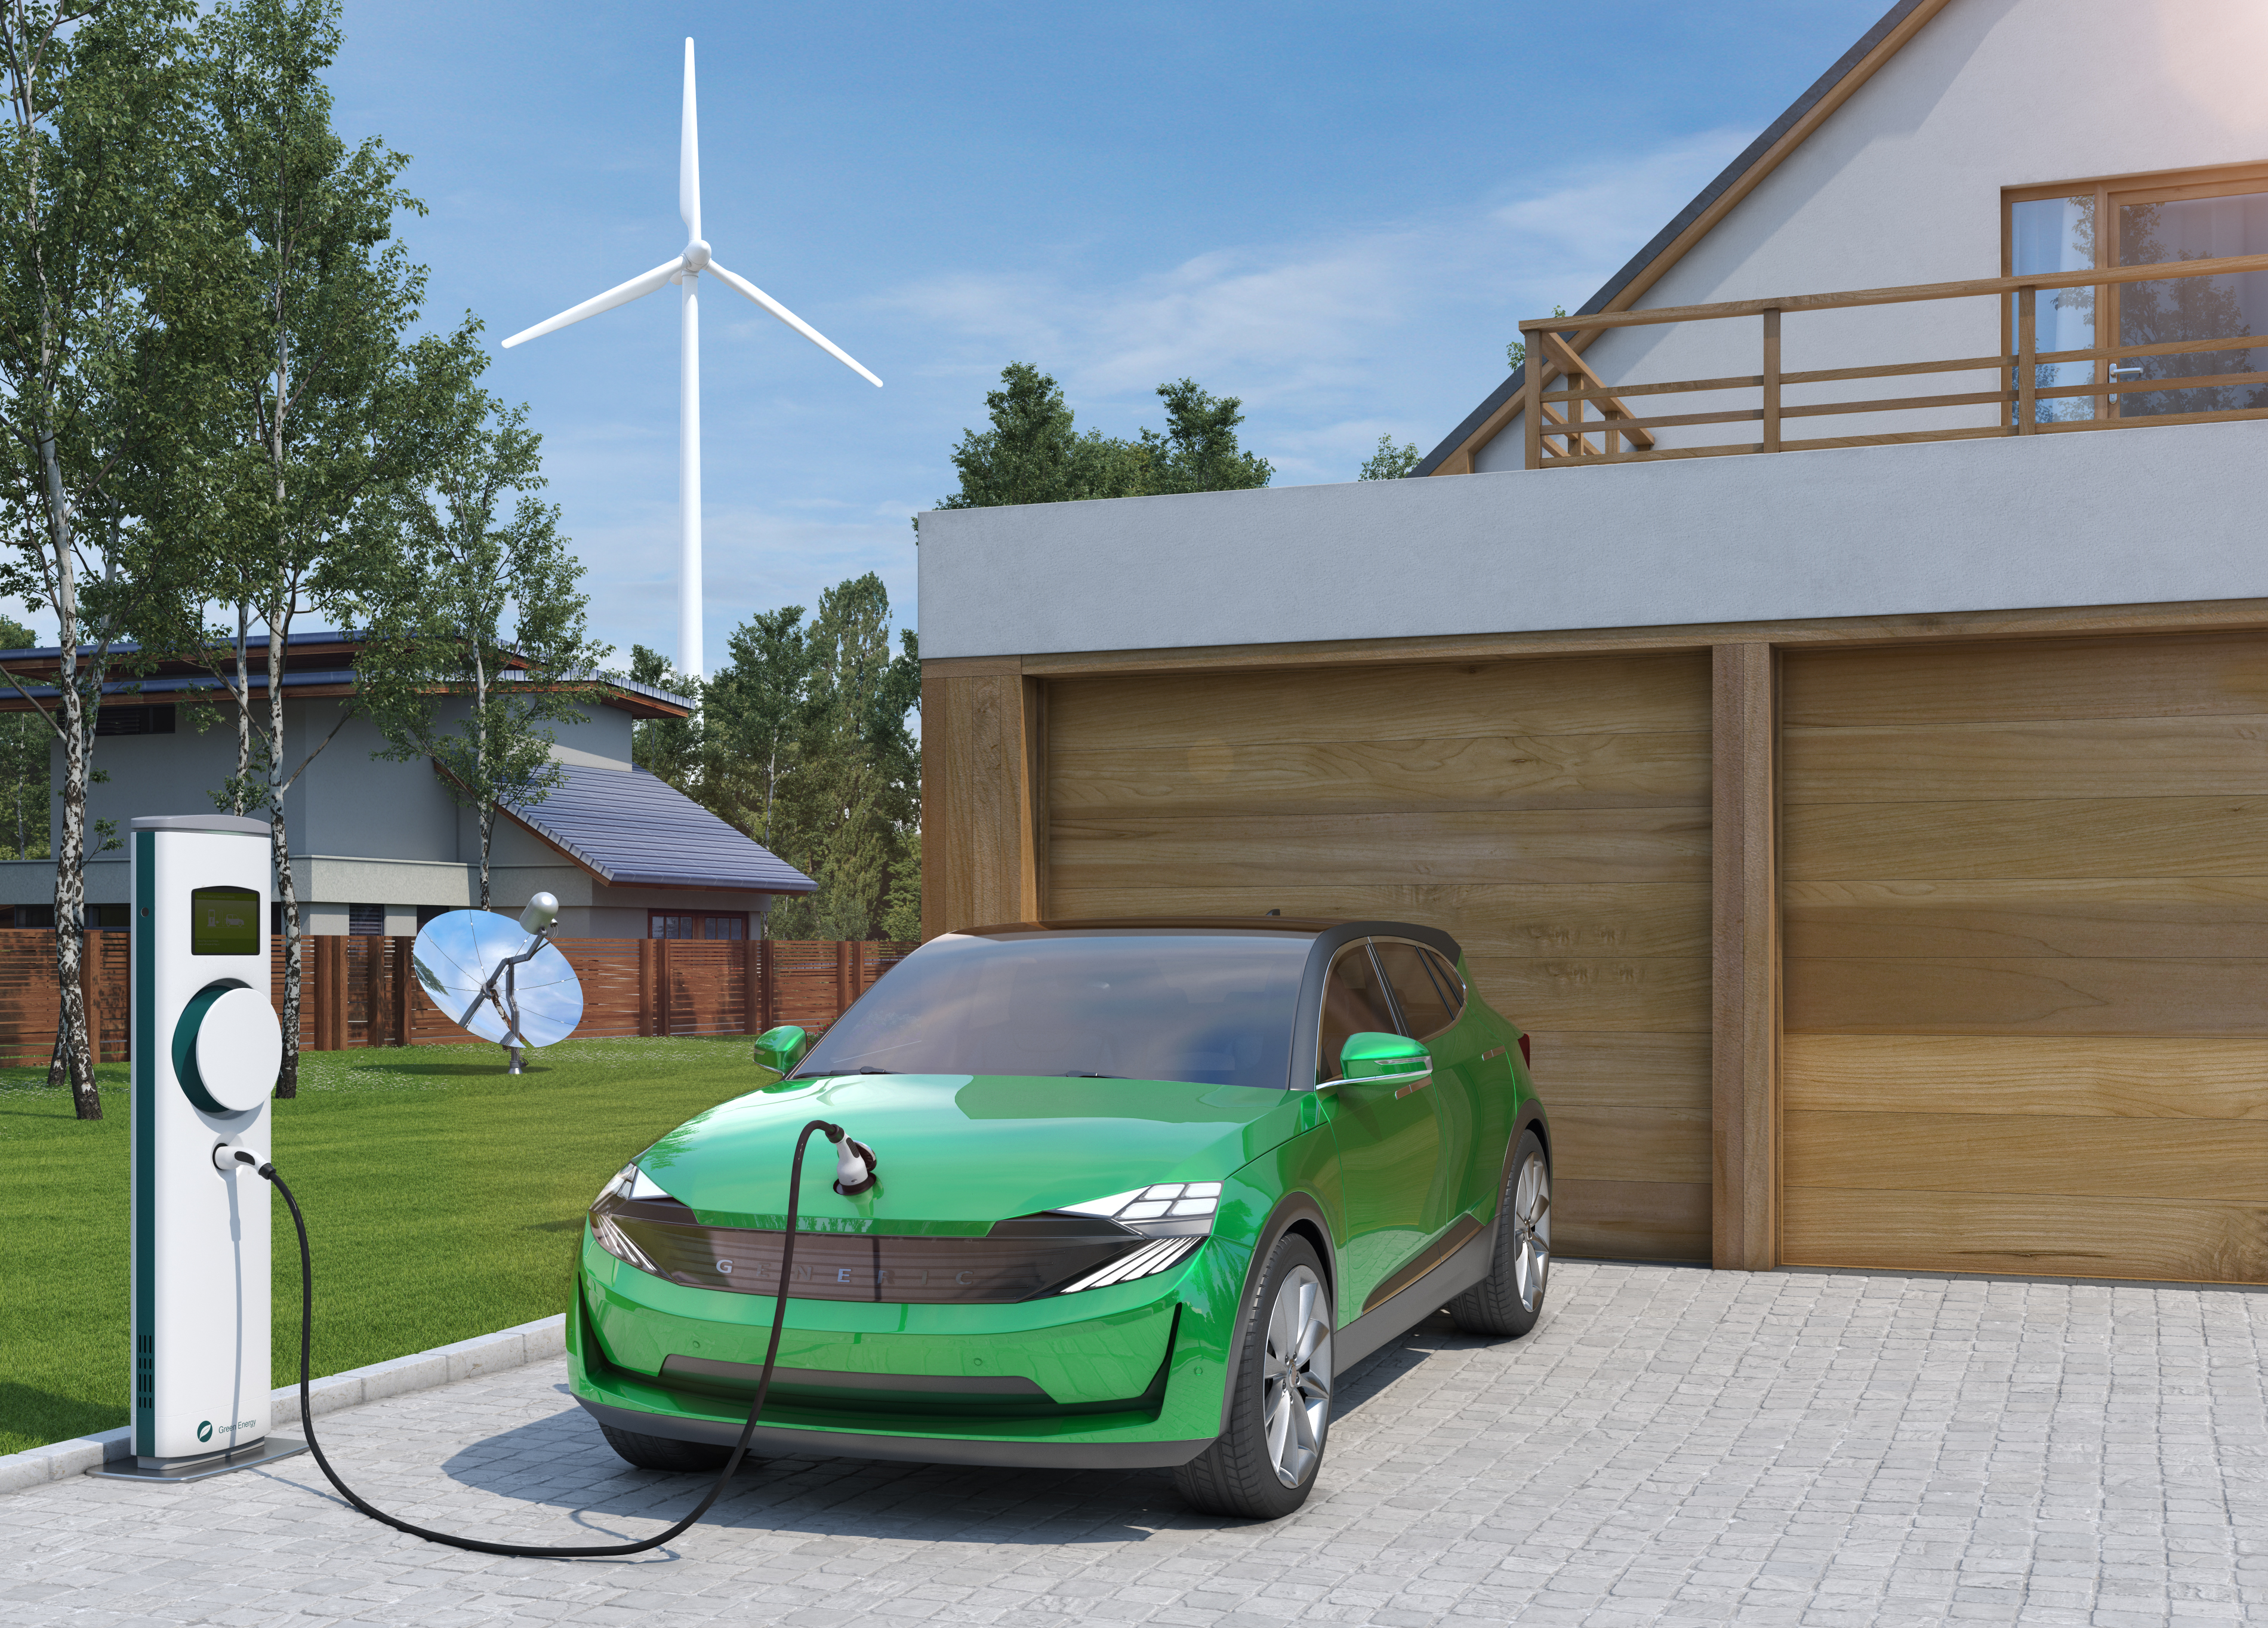 electric car SUV charging at home in front of modern low energy suburban house